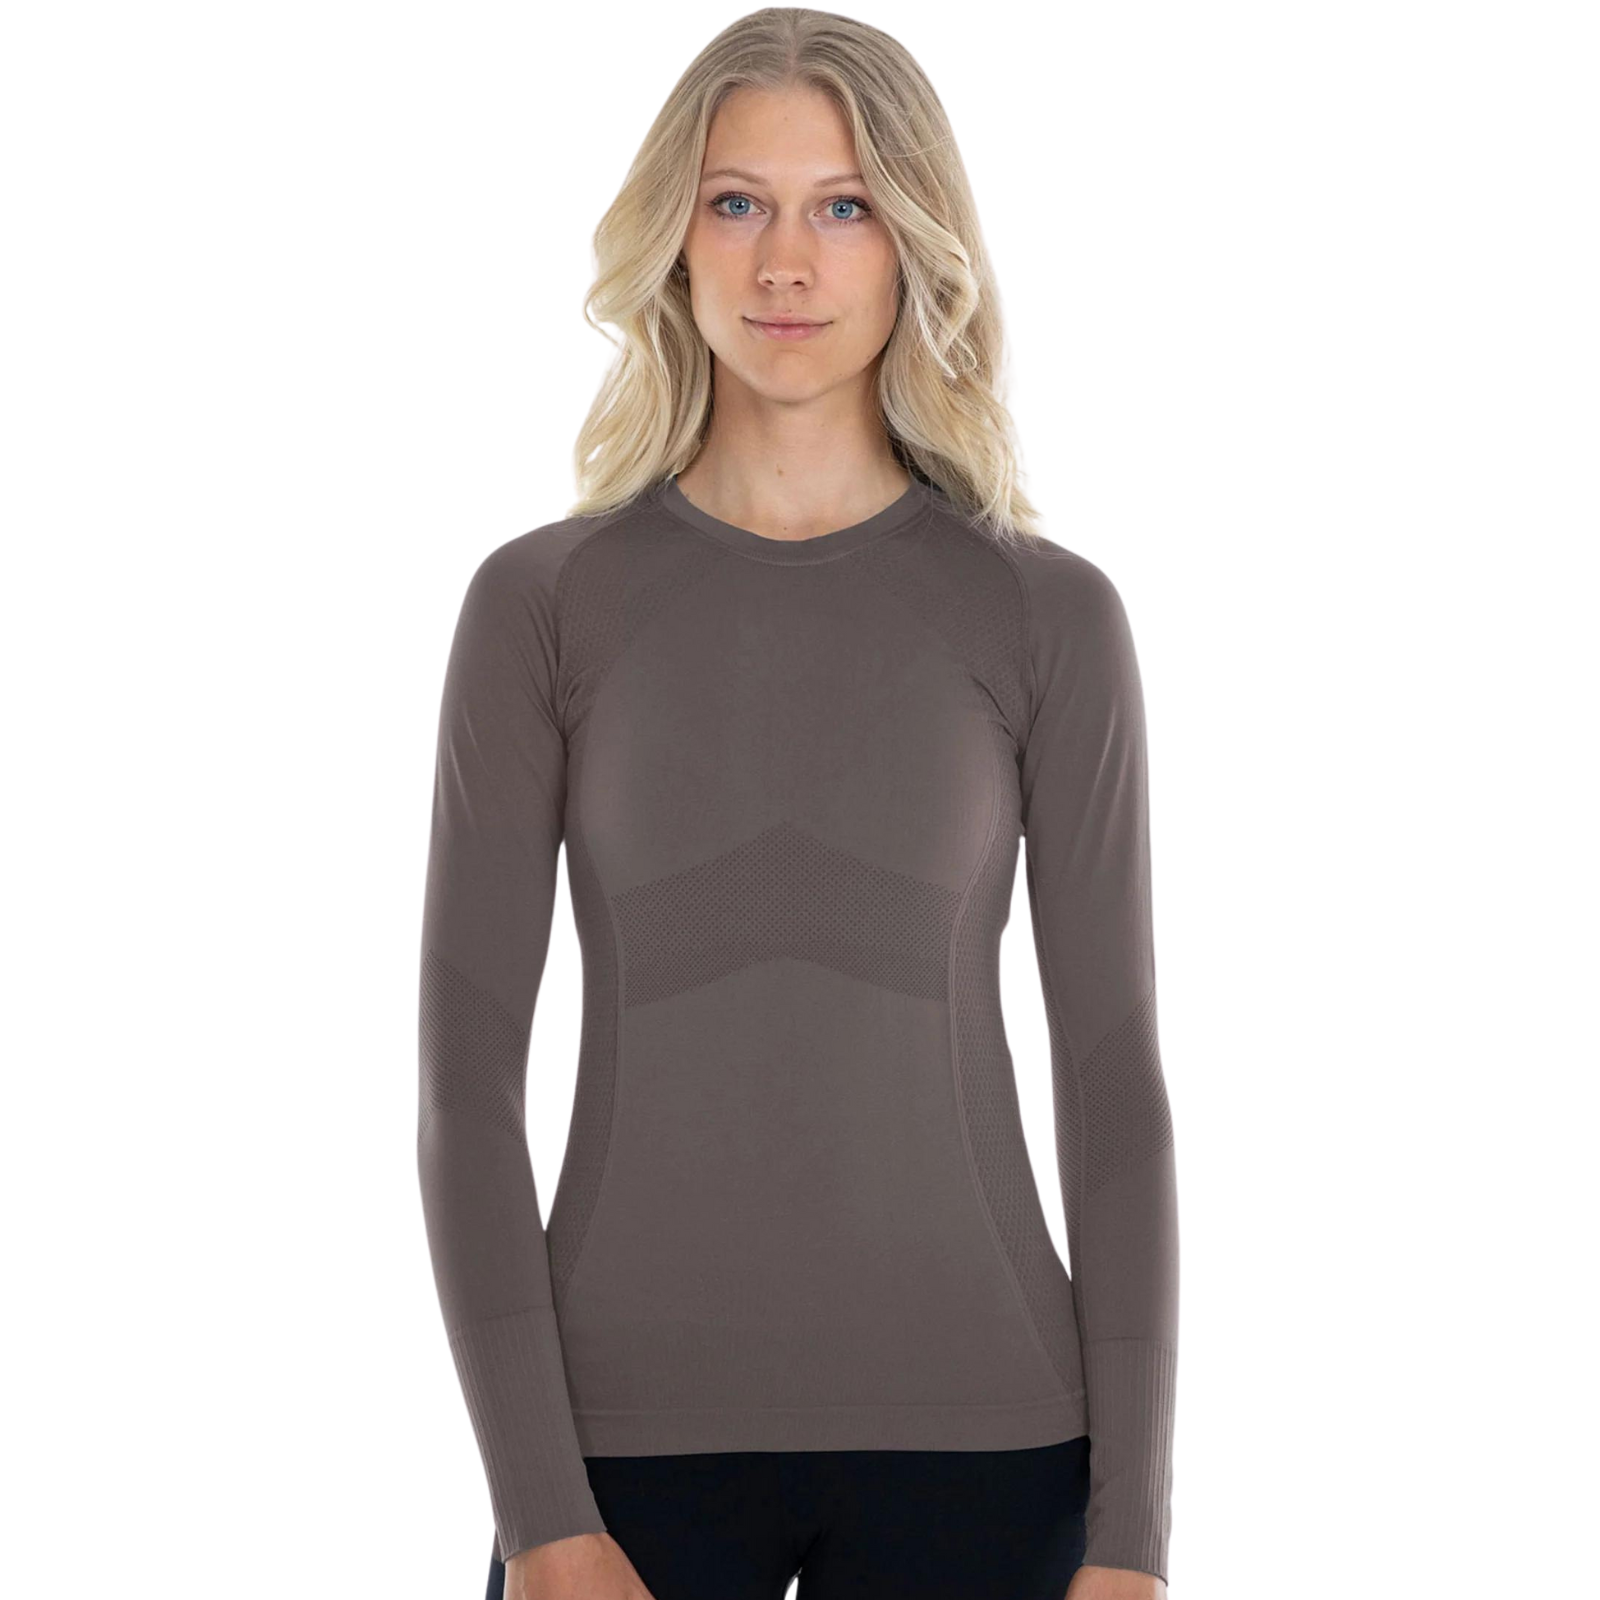 Anique Long Sleeve Crew Shirt in Fossil - Women&#39;s Medium (8)